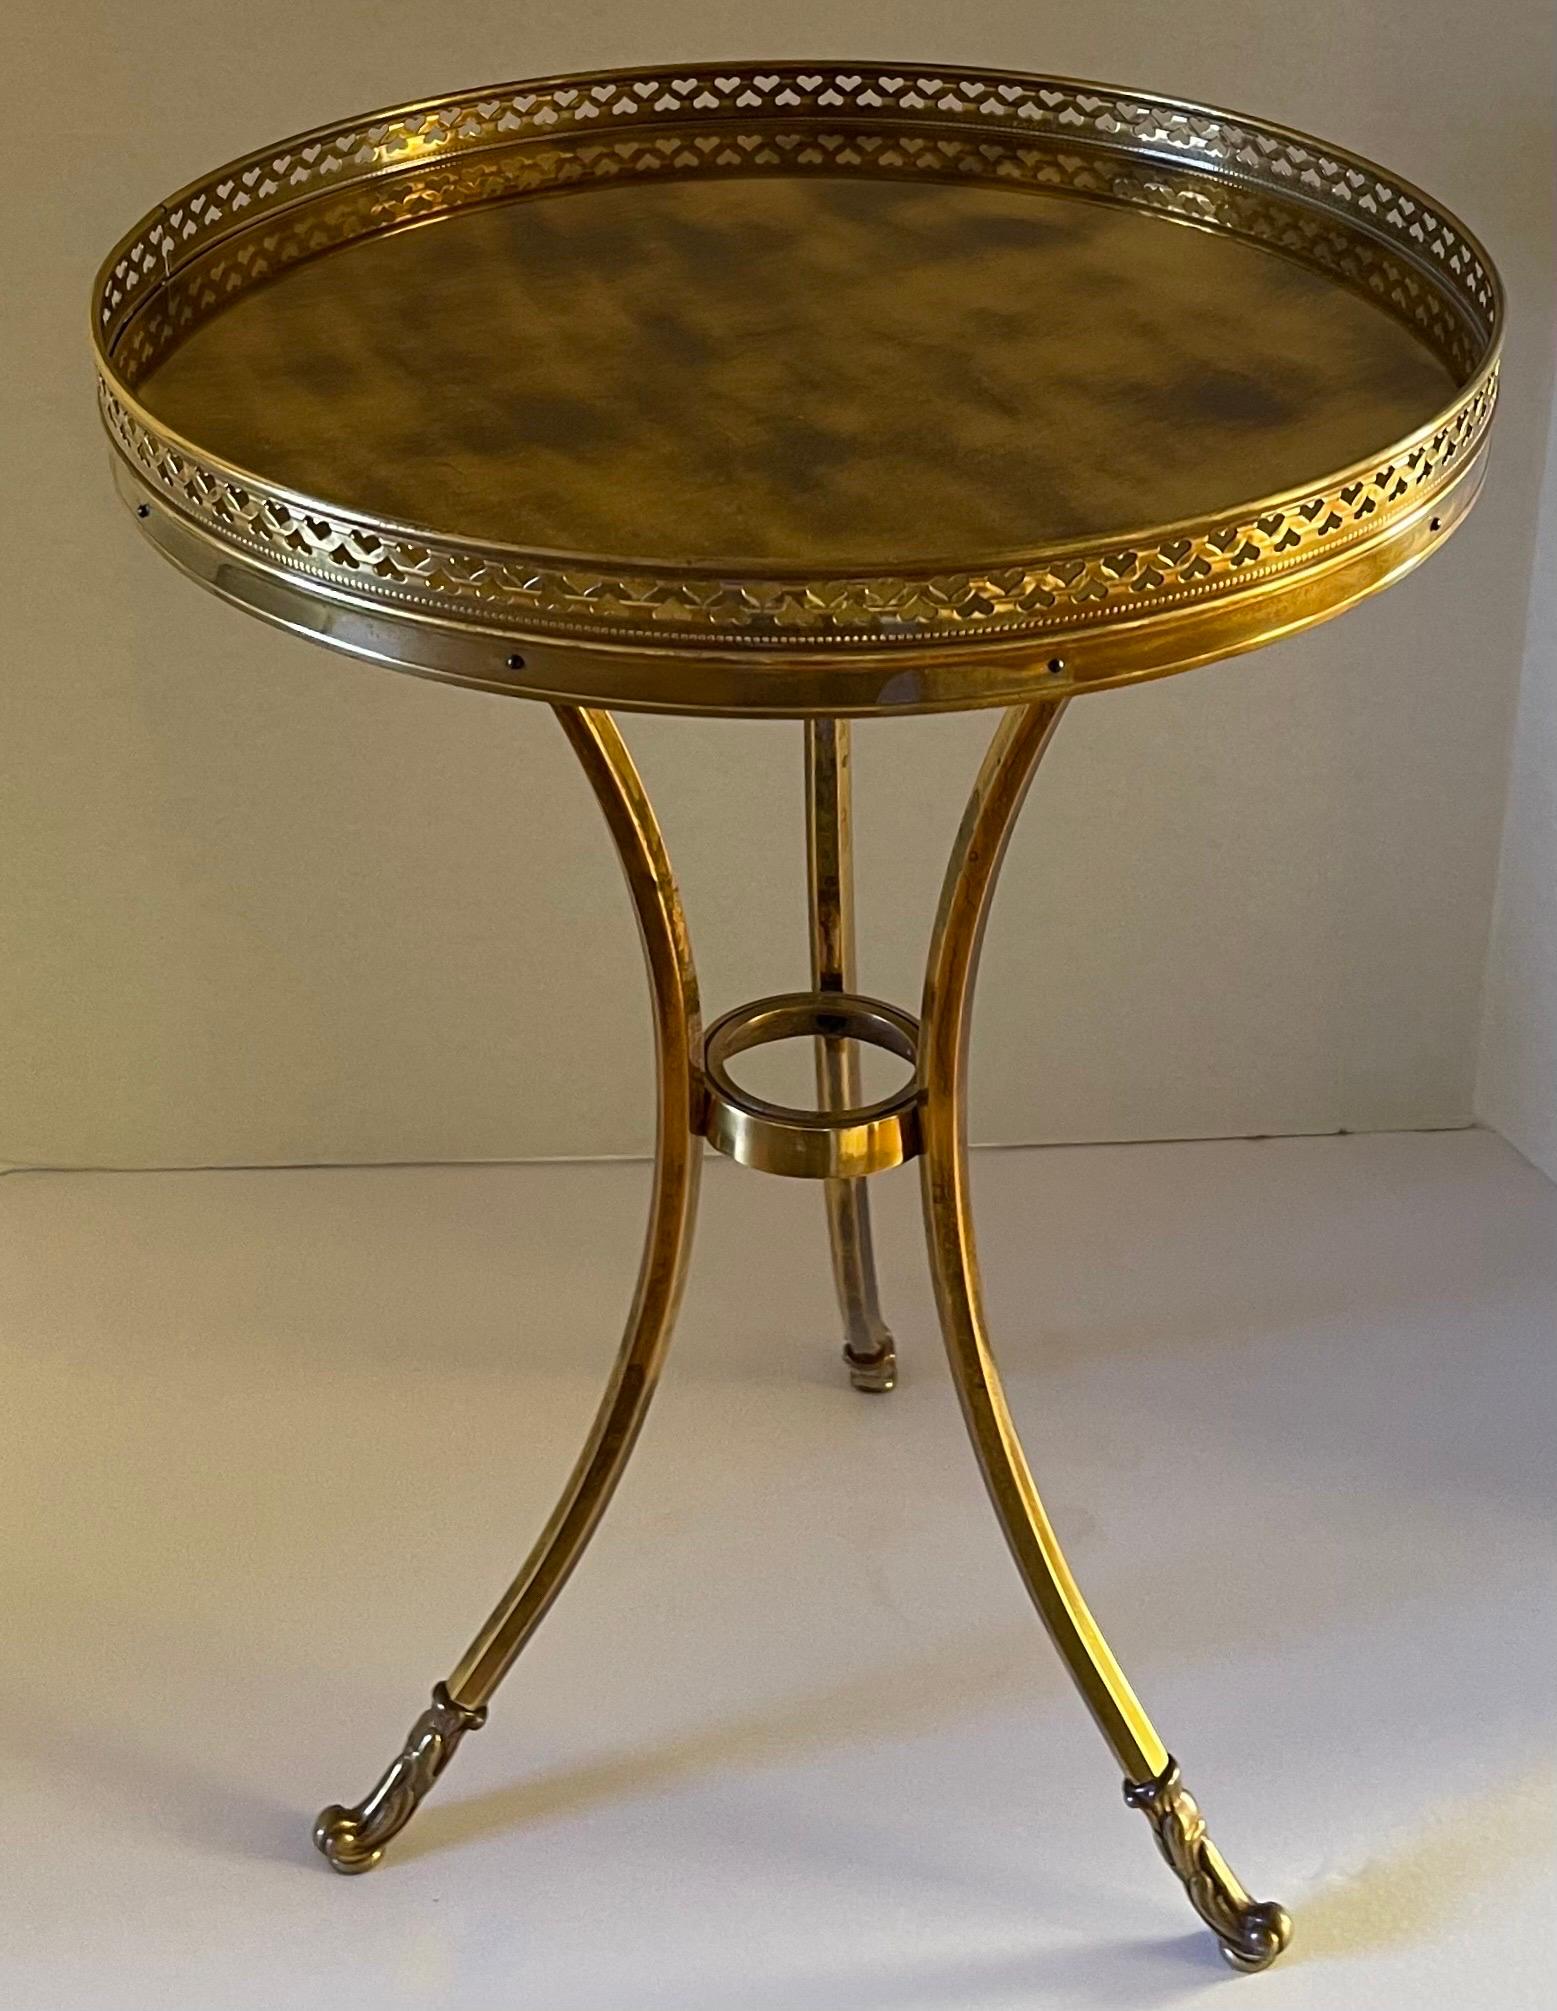 1960s tripod leg round top gueridon table. Pierced brass decorative rail around the table top. As found antique burnished brass construction.